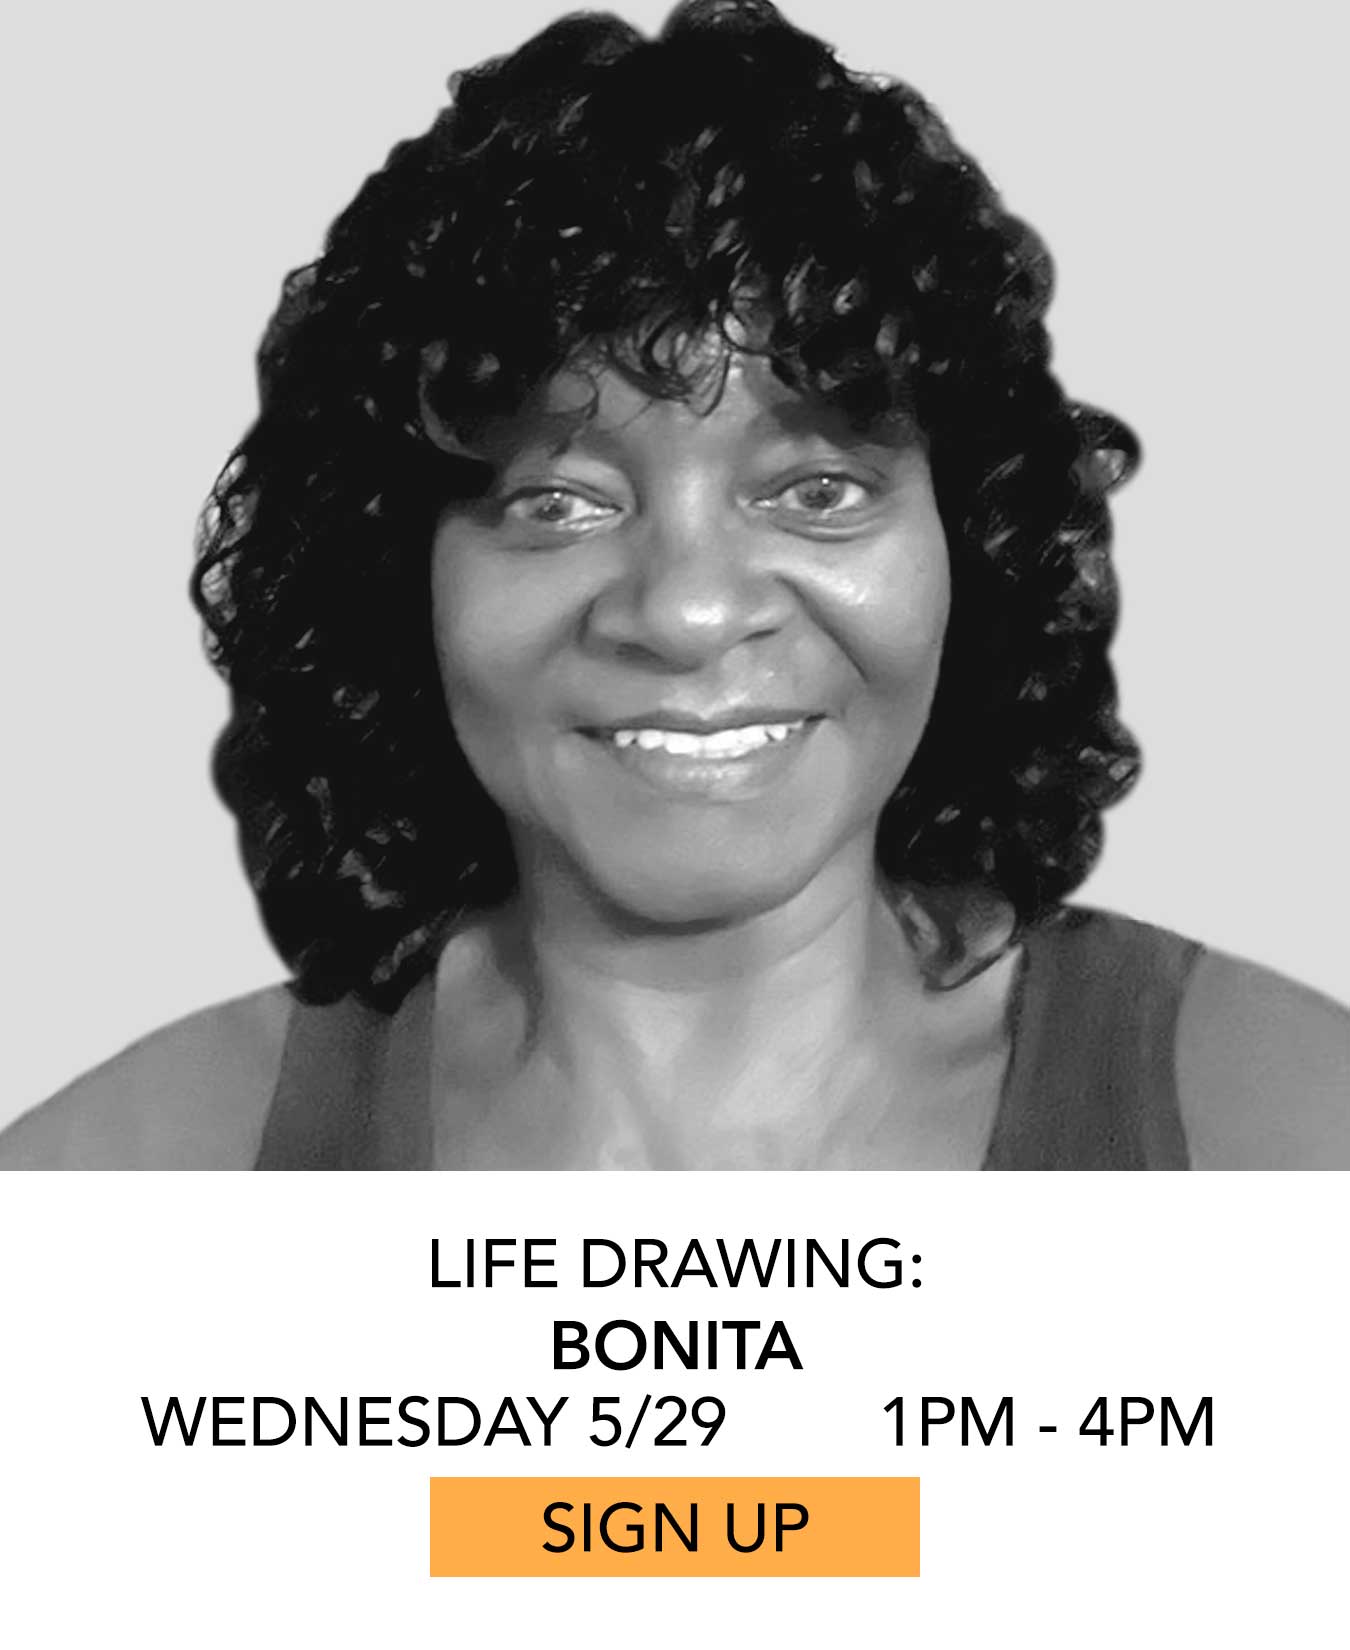 Life Drawing: Bonita. Wednesday 5/29 from 1pm to 4pm. Click to Sign Up.